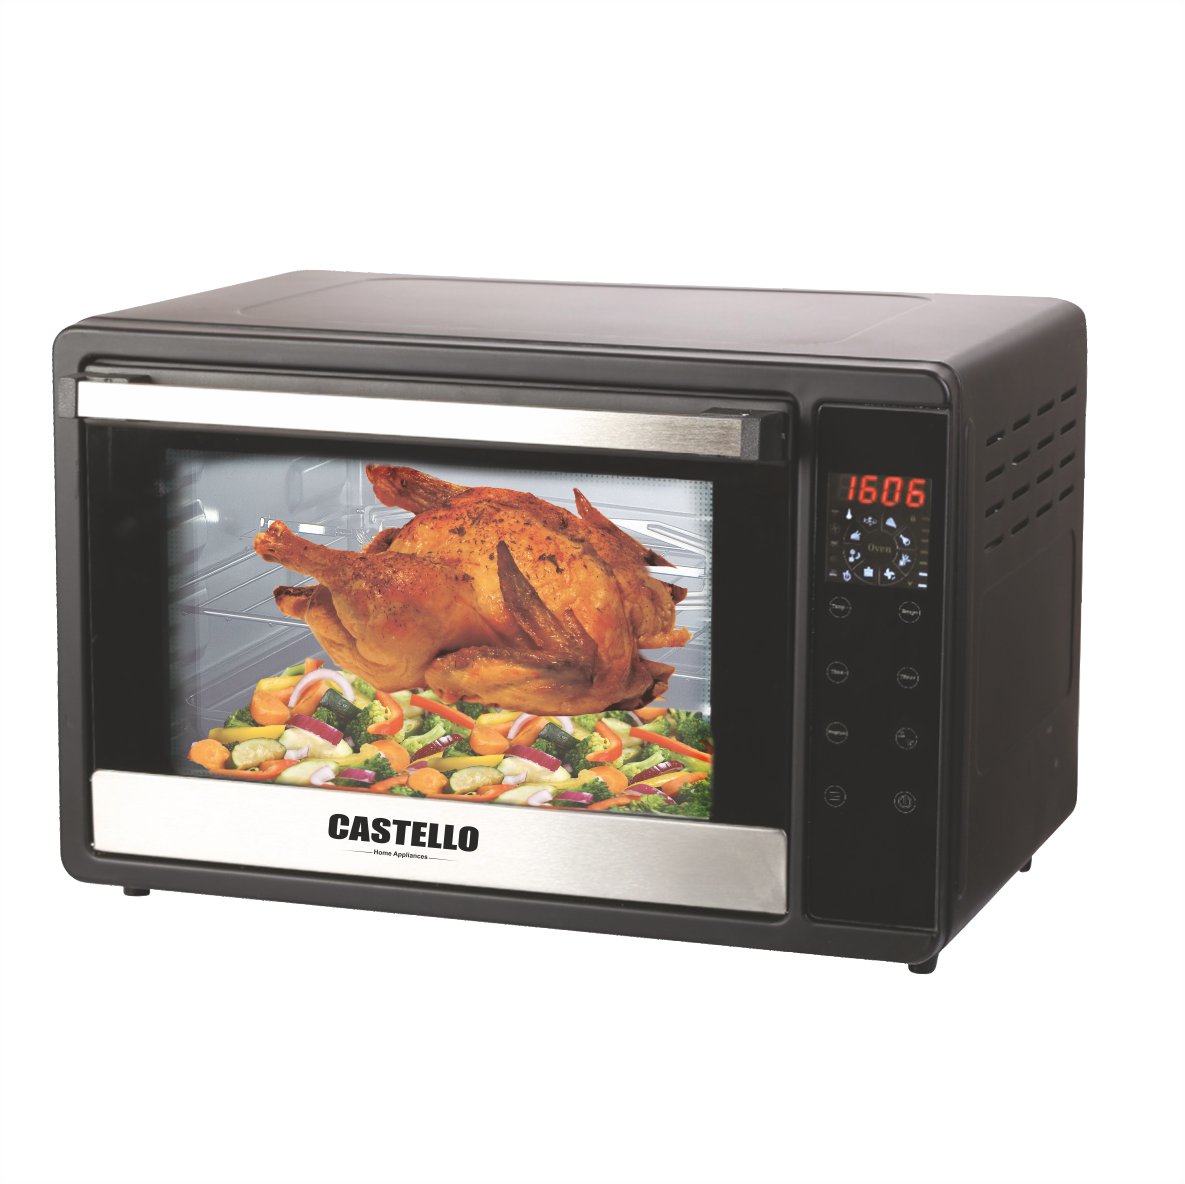 Digital touch oven toaster CEO 620